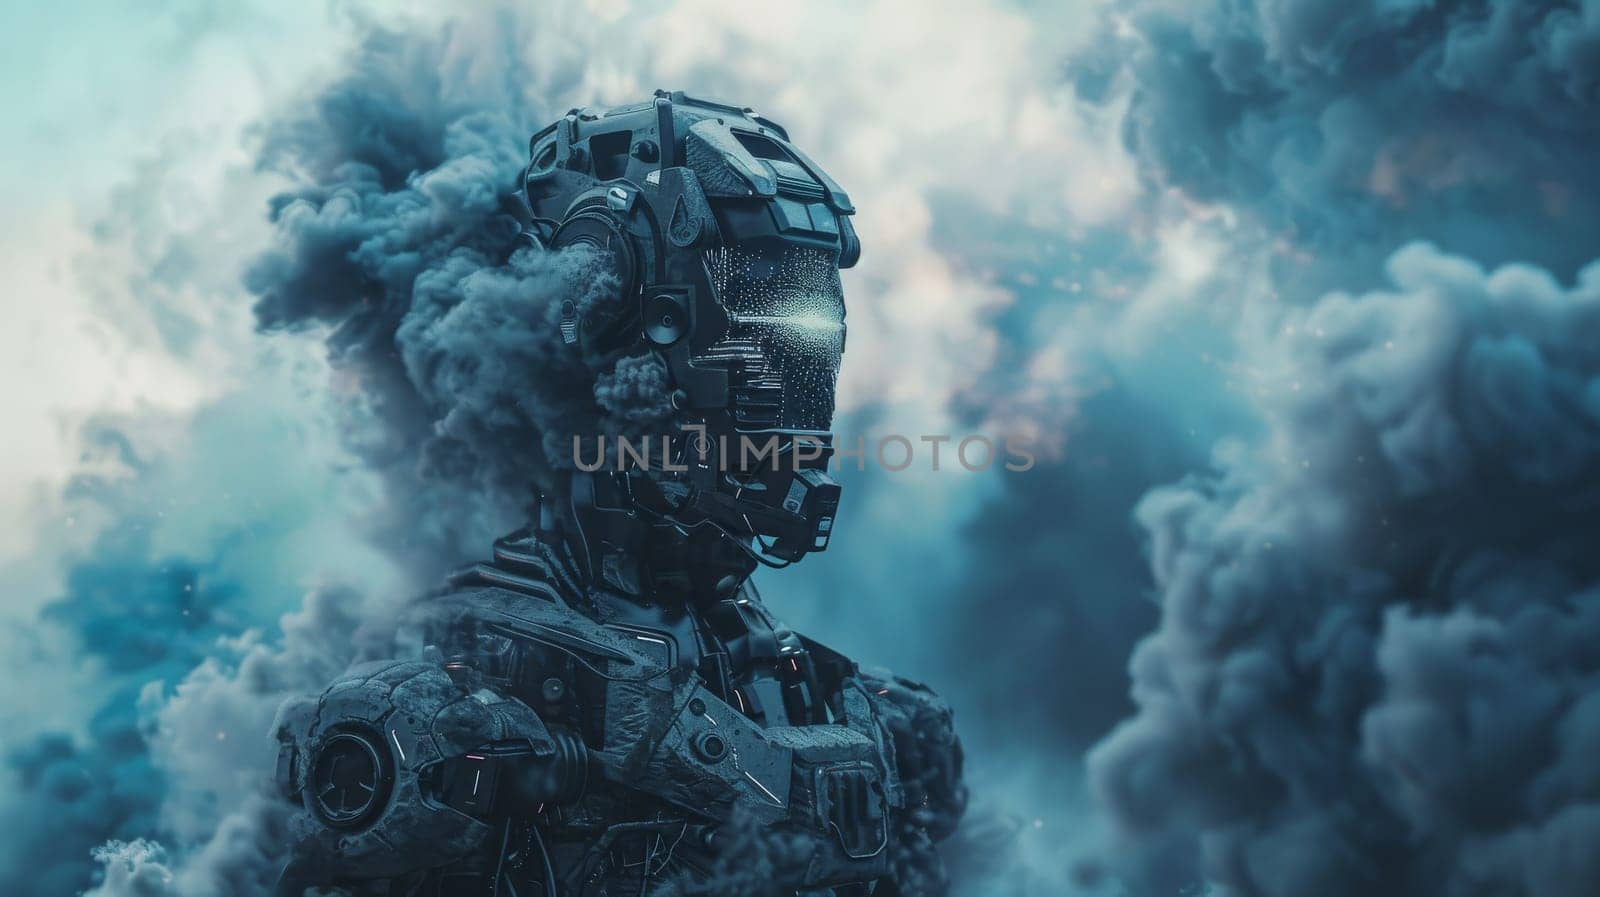 A robot is standing in a cloud of smoke. The robot is wearing a helmet and has a metallic appearance. The smoke is thick and dark, giving the scene a mysterious and ominous mood